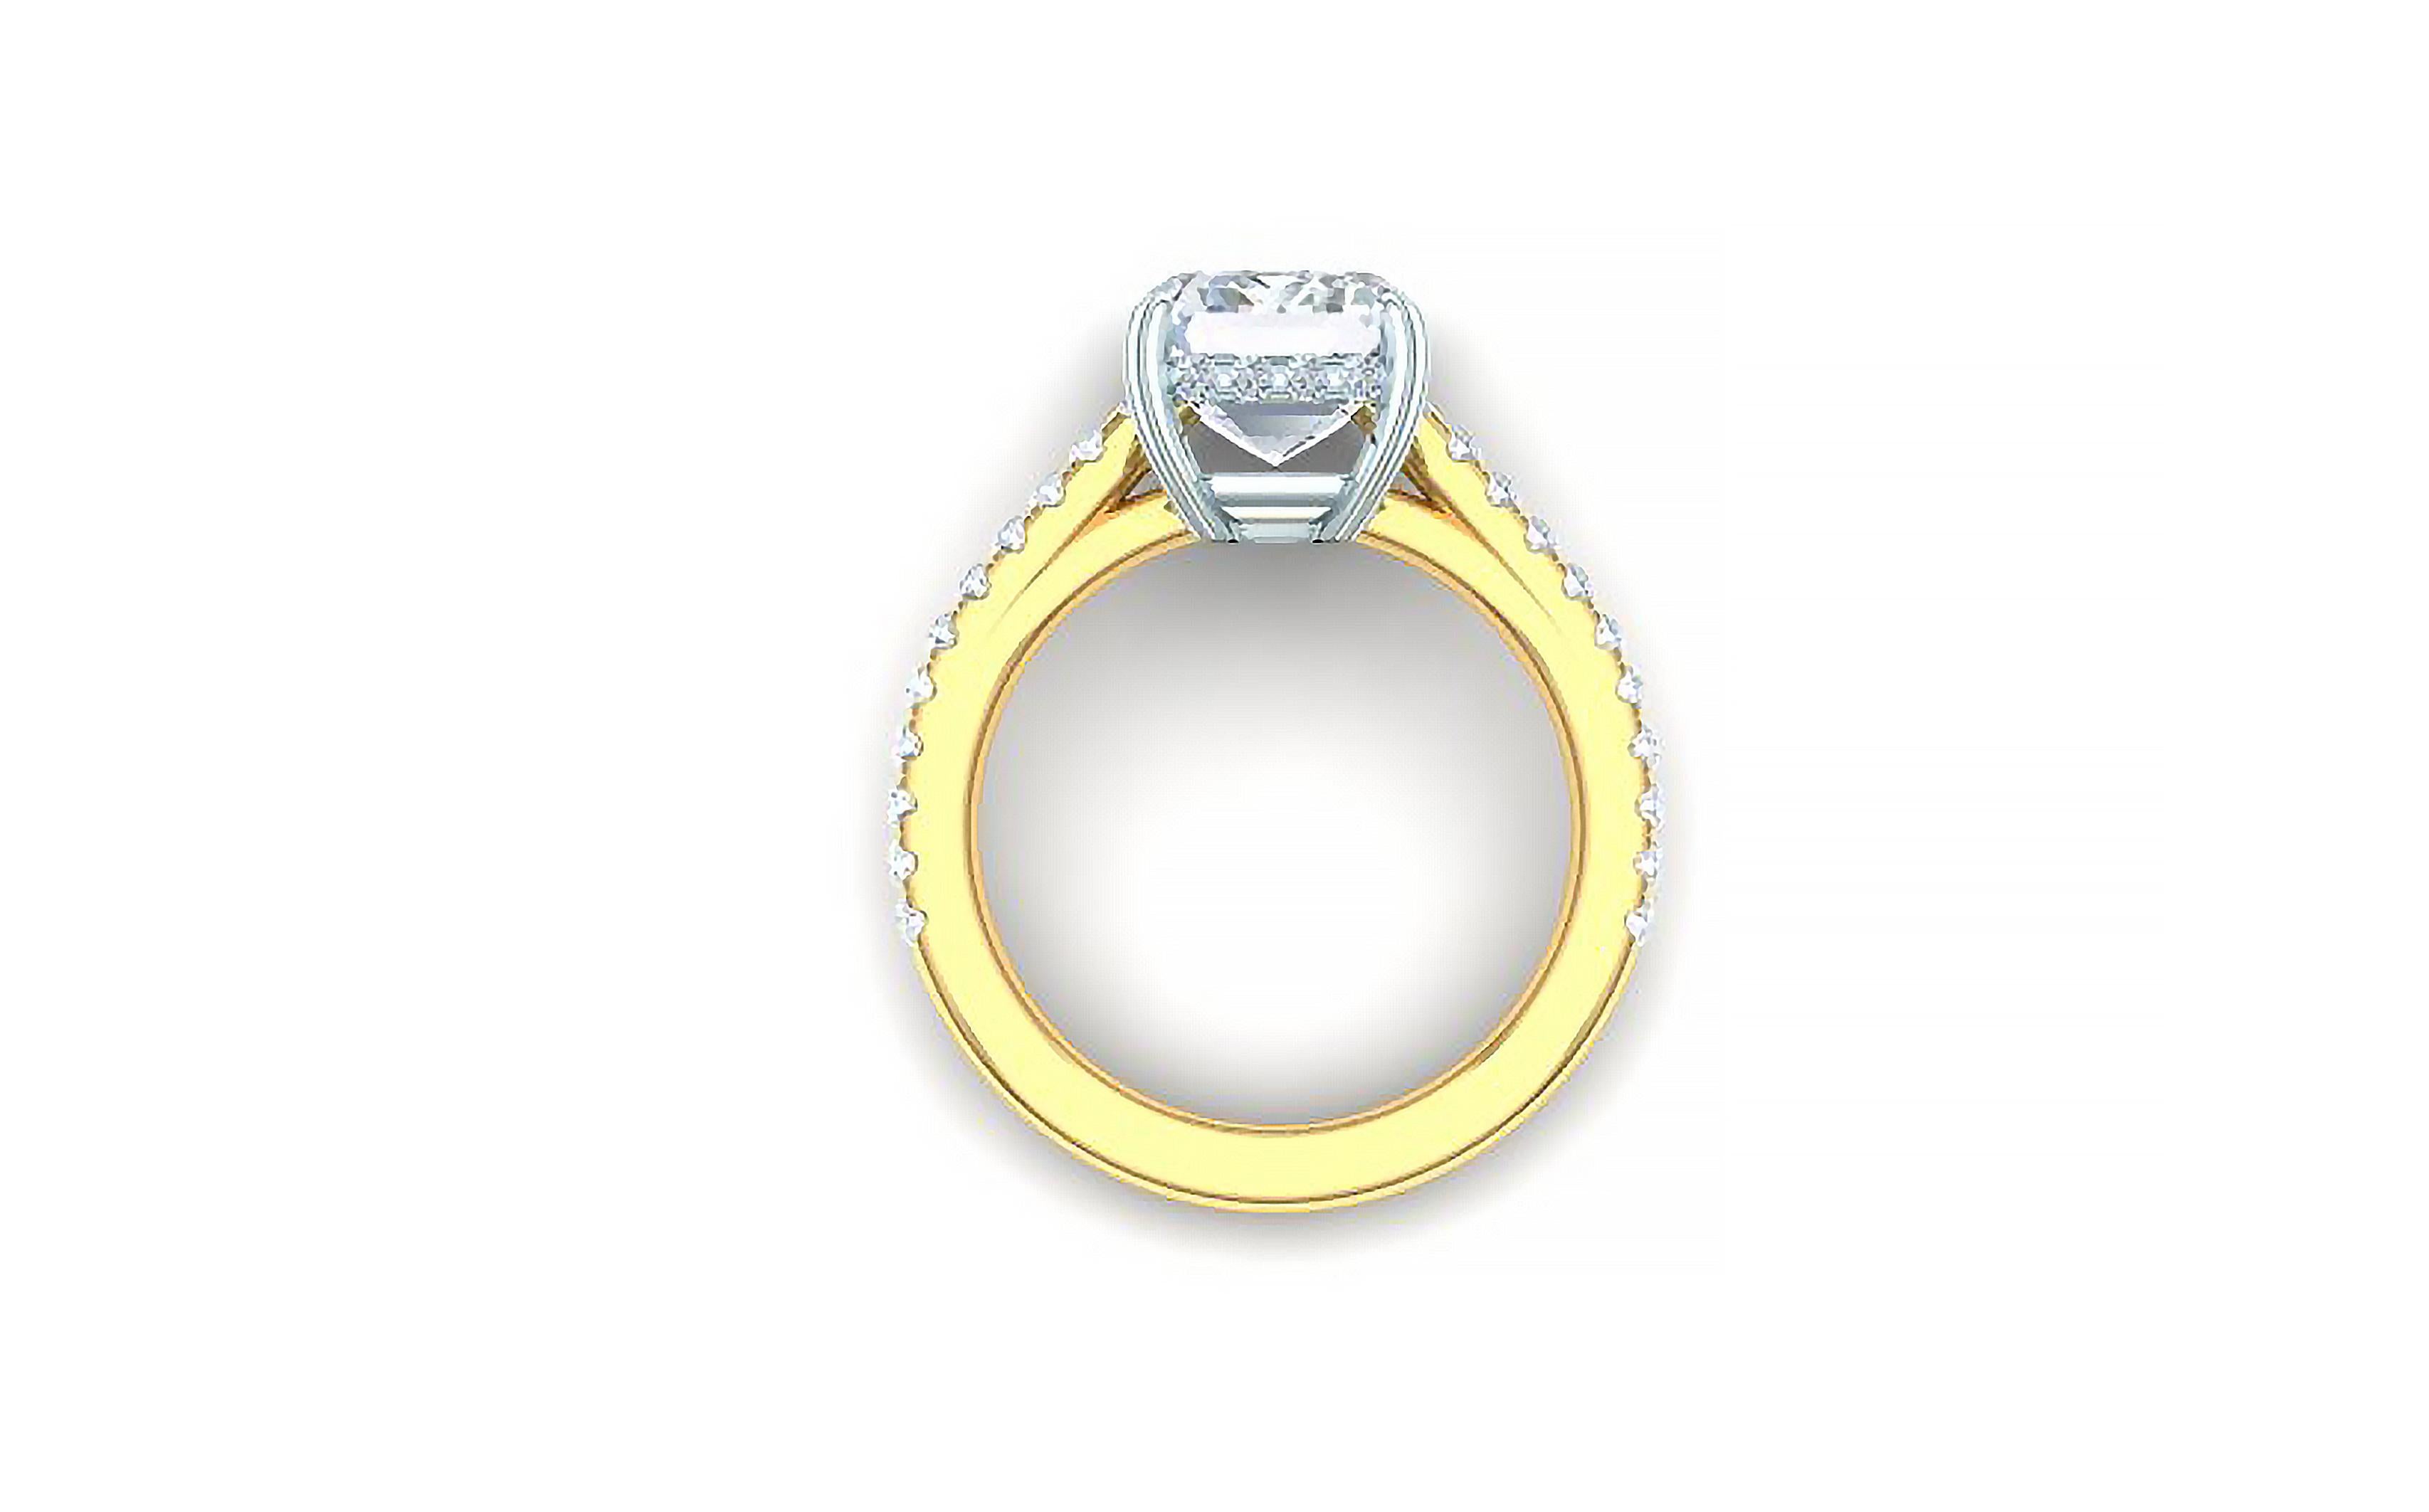 This classic and beautiful diamond ring has a 2 carat GIA certified G-VS2 Emerald cut diamond centered and over one carat of round brilliant diamond set in the shank of the ring. This diamond ring is cast from both platinum and 18k yellow gold. The